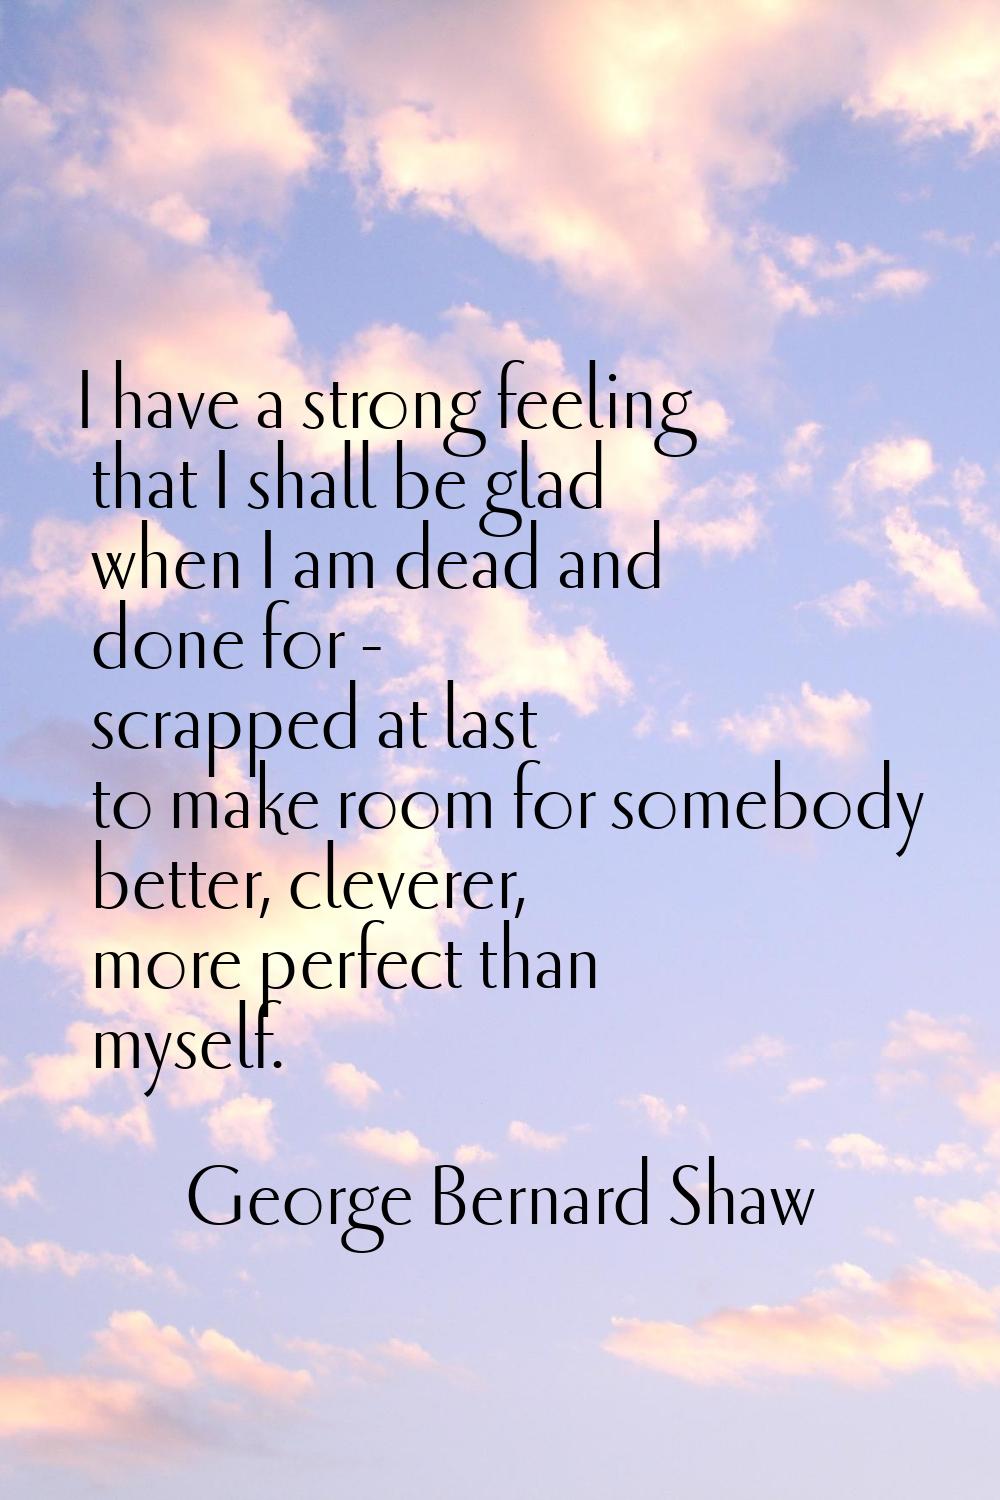 I have a strong feeling that I shall be glad when I am dead and done for - scrapped at last to make